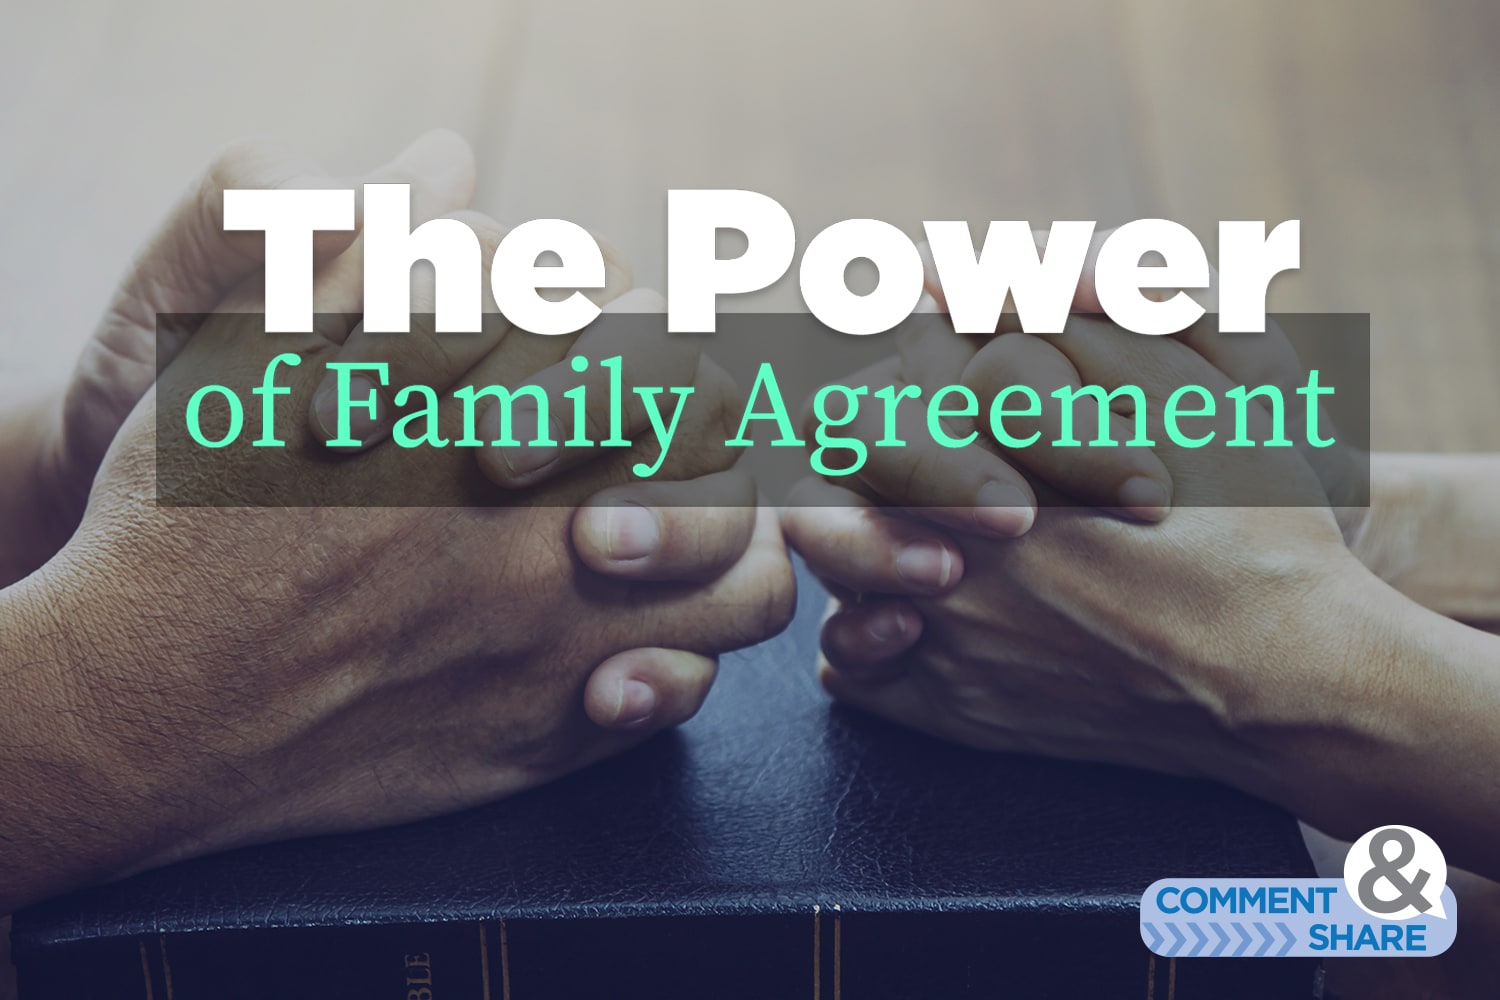 The Power of Family Agreement